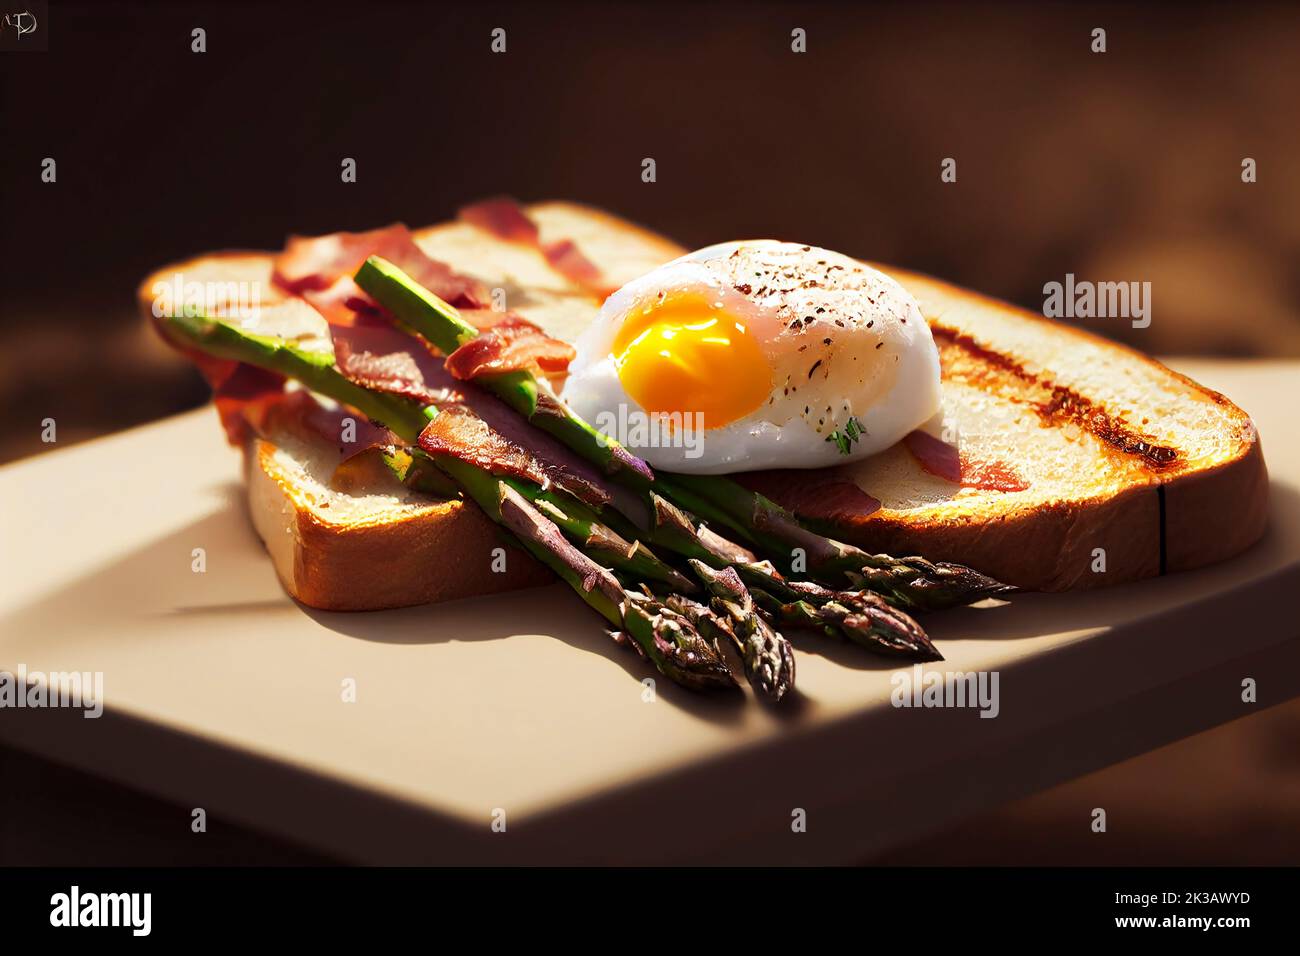 Grilled toast with asparagus, poached egg, bacon on a stone cutting board, food photography and illustration Stock Photo